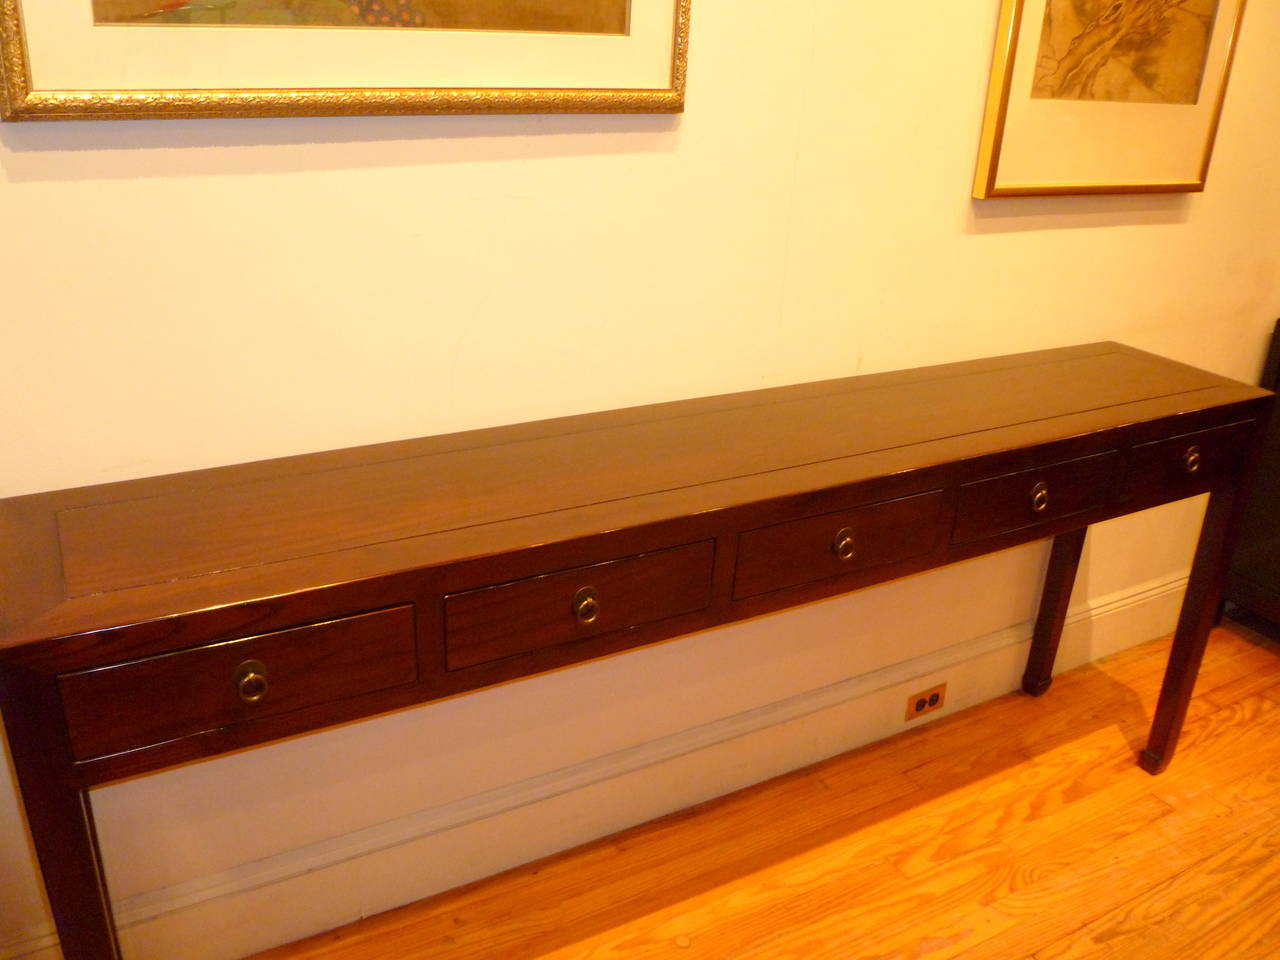 Early 20th Century Fine Ju Mu Wood Console Table with Drawers